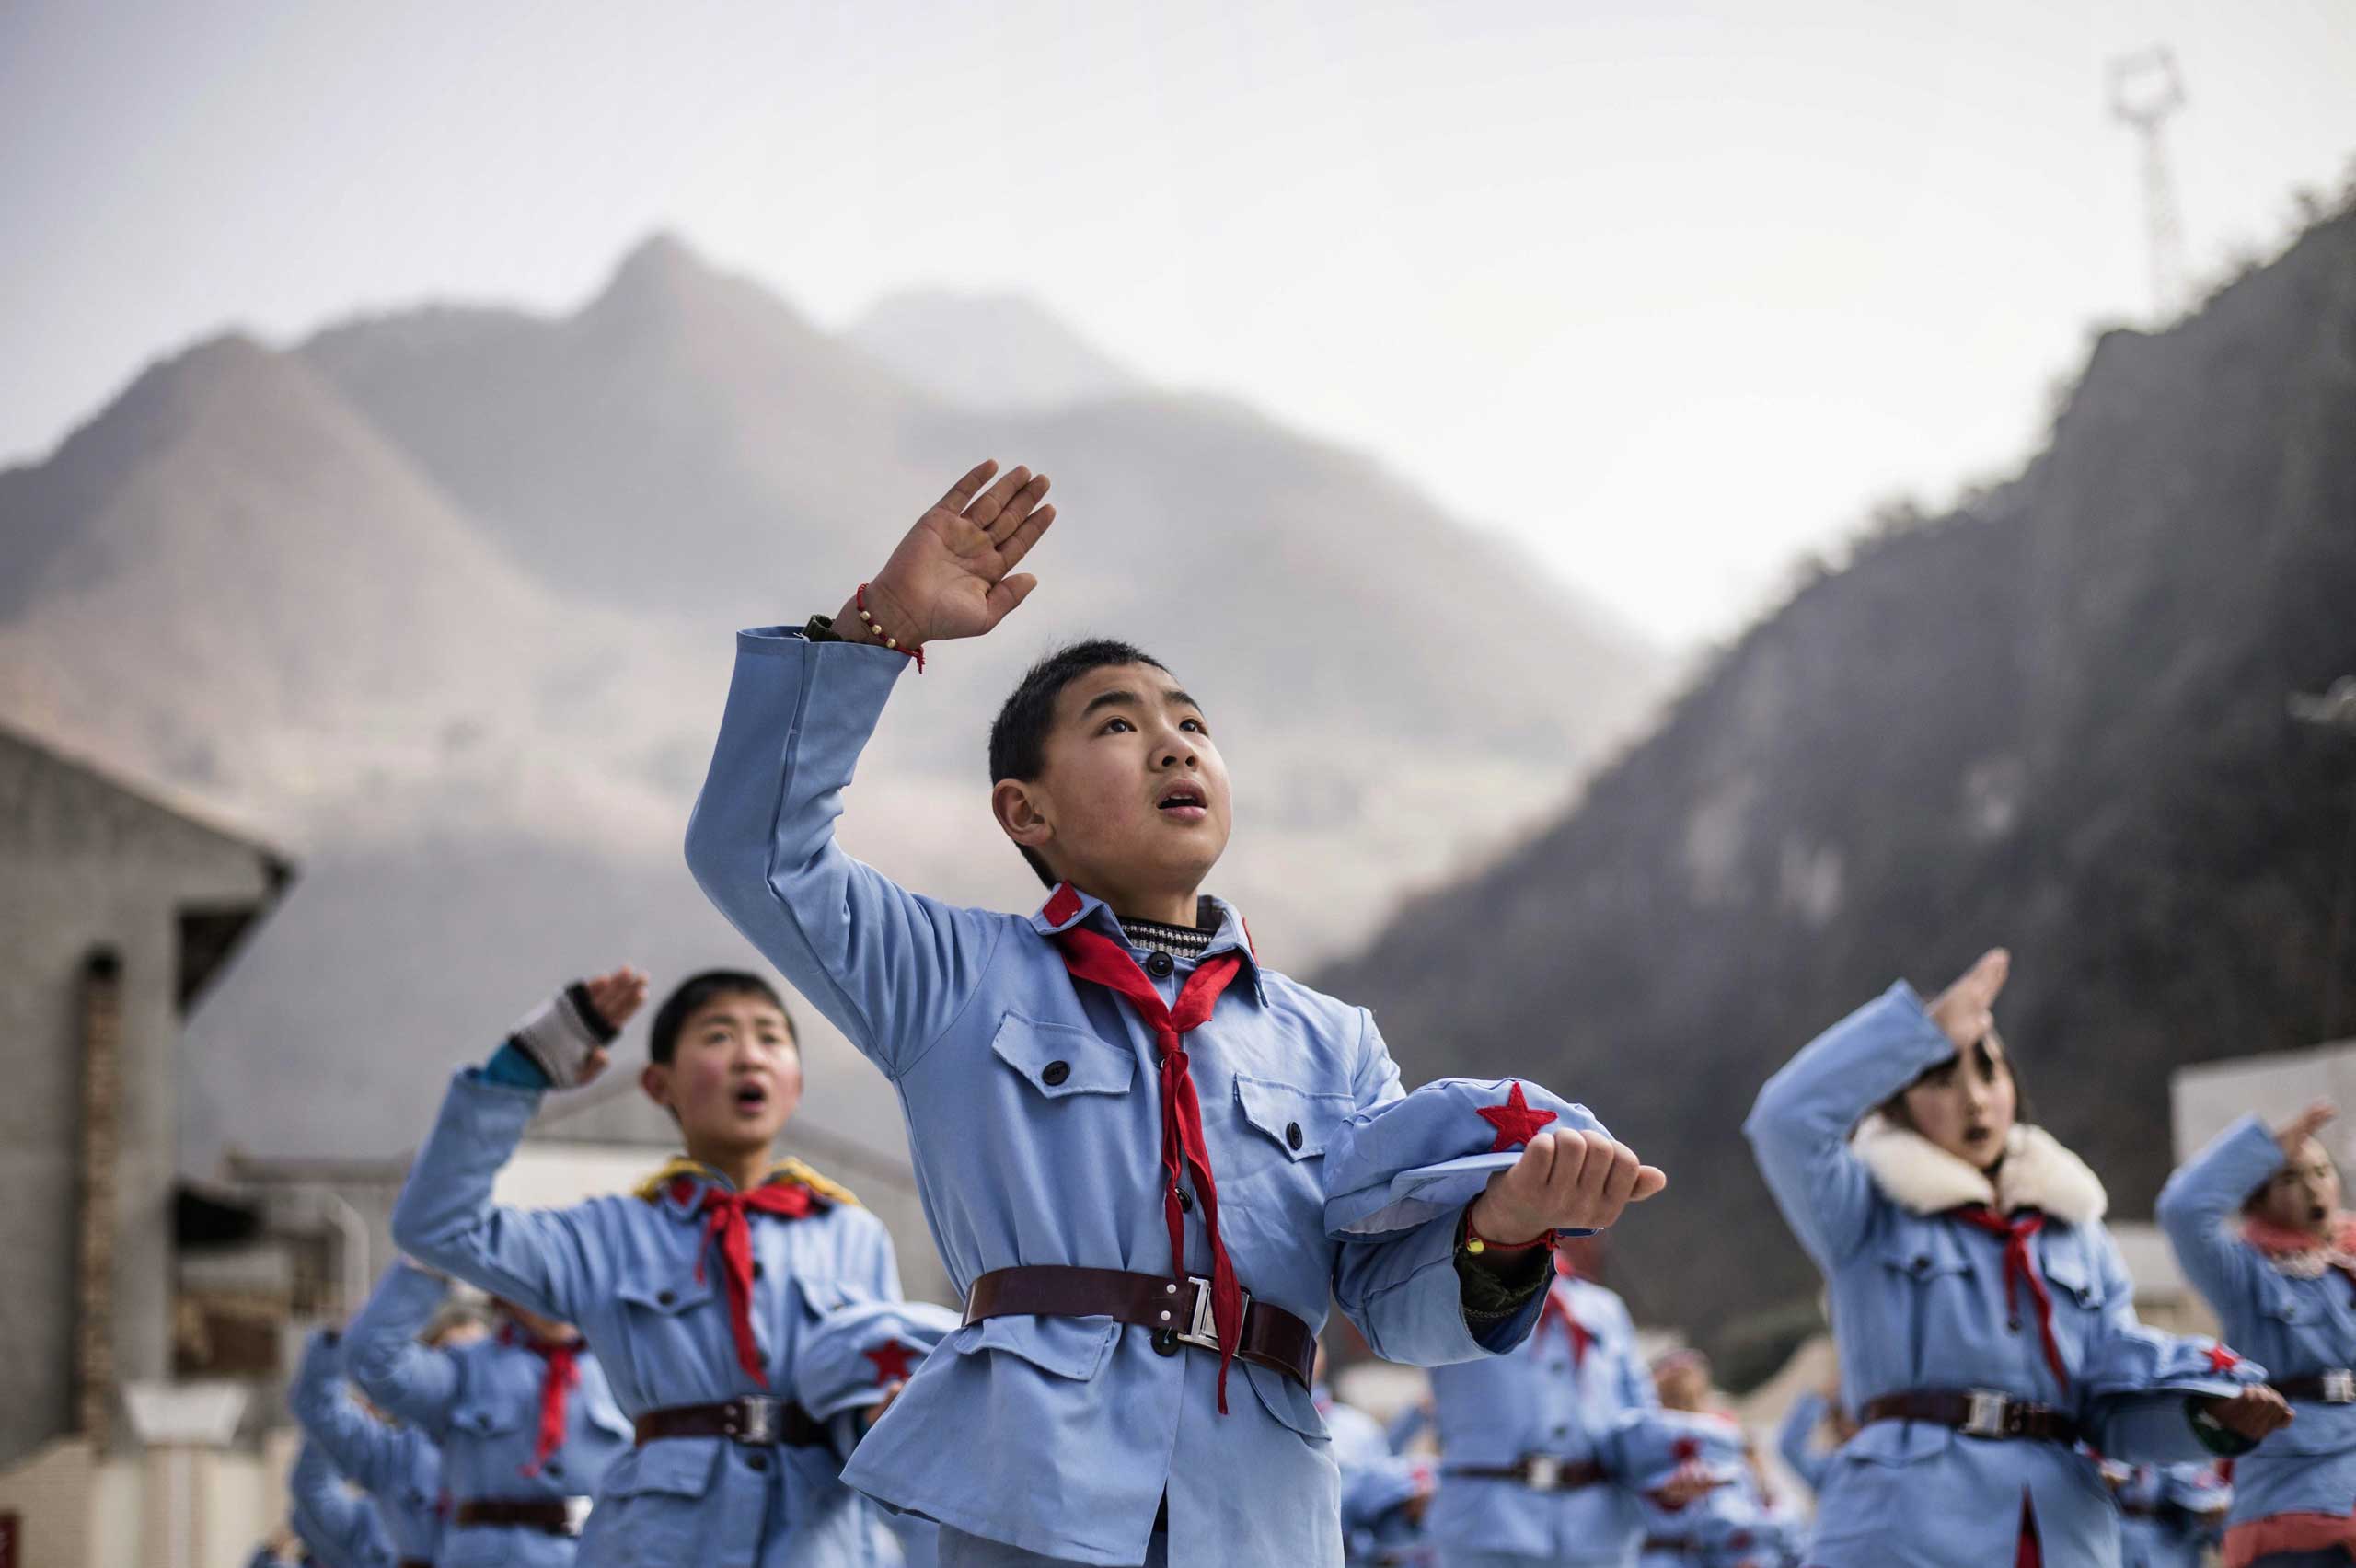 Jan. 21, 2015. Children dressed in uniform sing after raising the national flag at the Beichuan Red army elementary school in Beichuan, southwest China's Sichuan province.